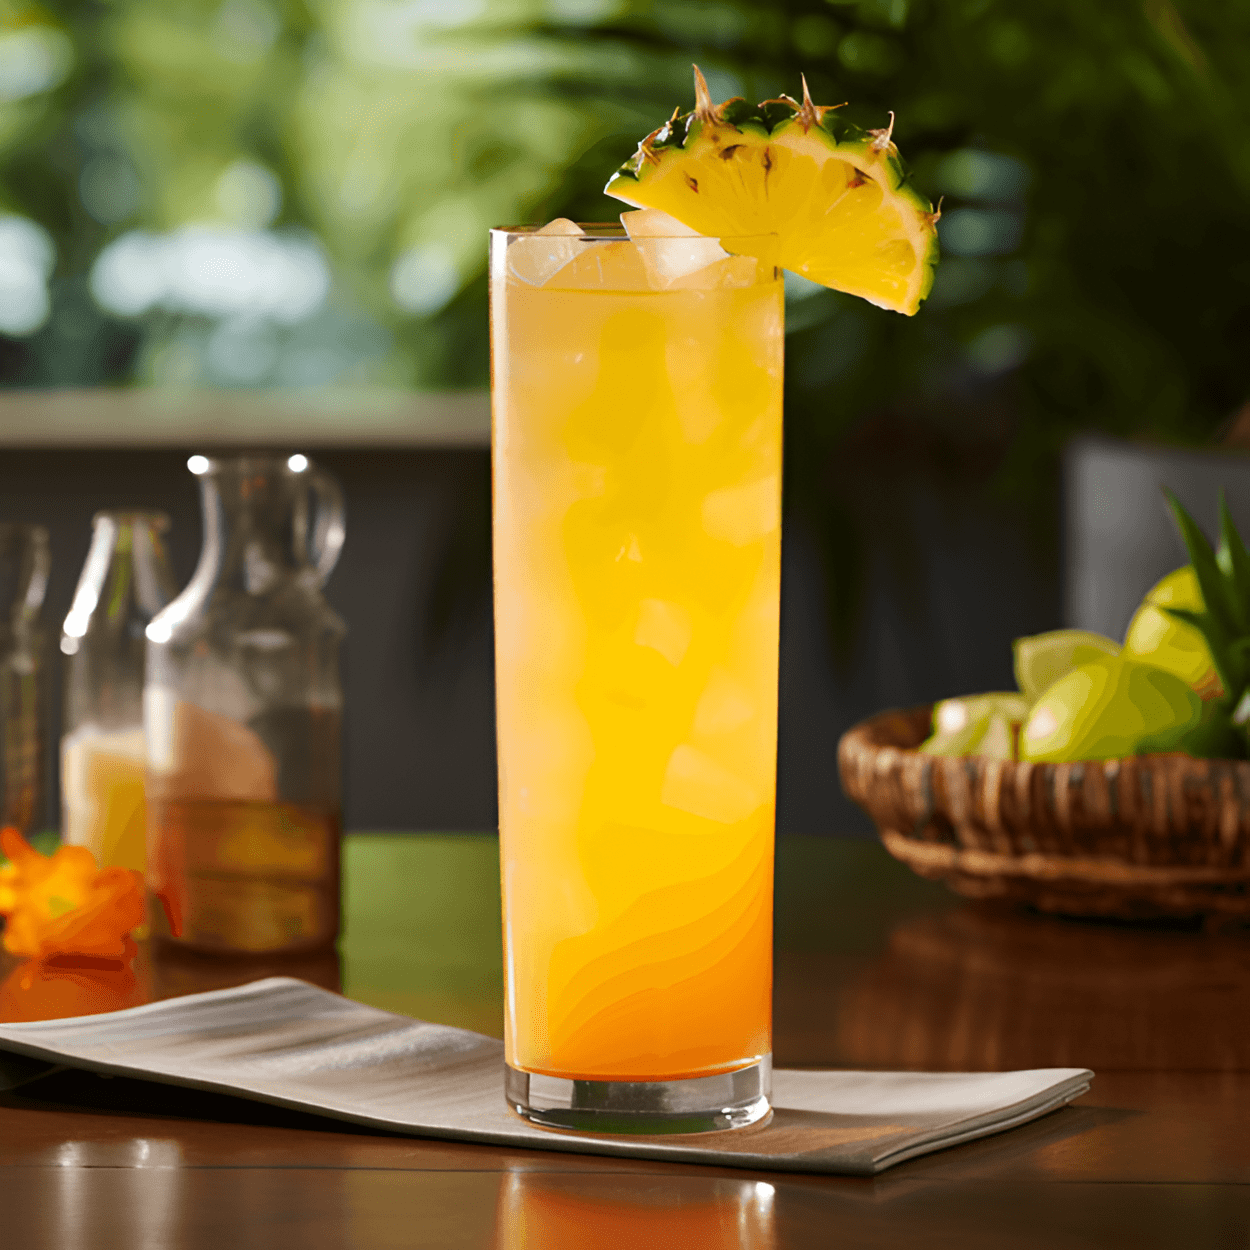 The 'Walking With Jesus' cocktail is a delightful blend of sweet and sour flavors. The tequila gives it a strong, fiery kick, while the pineapple juice adds a sweet, tropical touch. The lime juice and simple syrup balance out the flavors, adding a tangy freshness and a hint of sweetness. It's a refreshing, well-balanced cocktail that leaves a pleasant aftertaste.